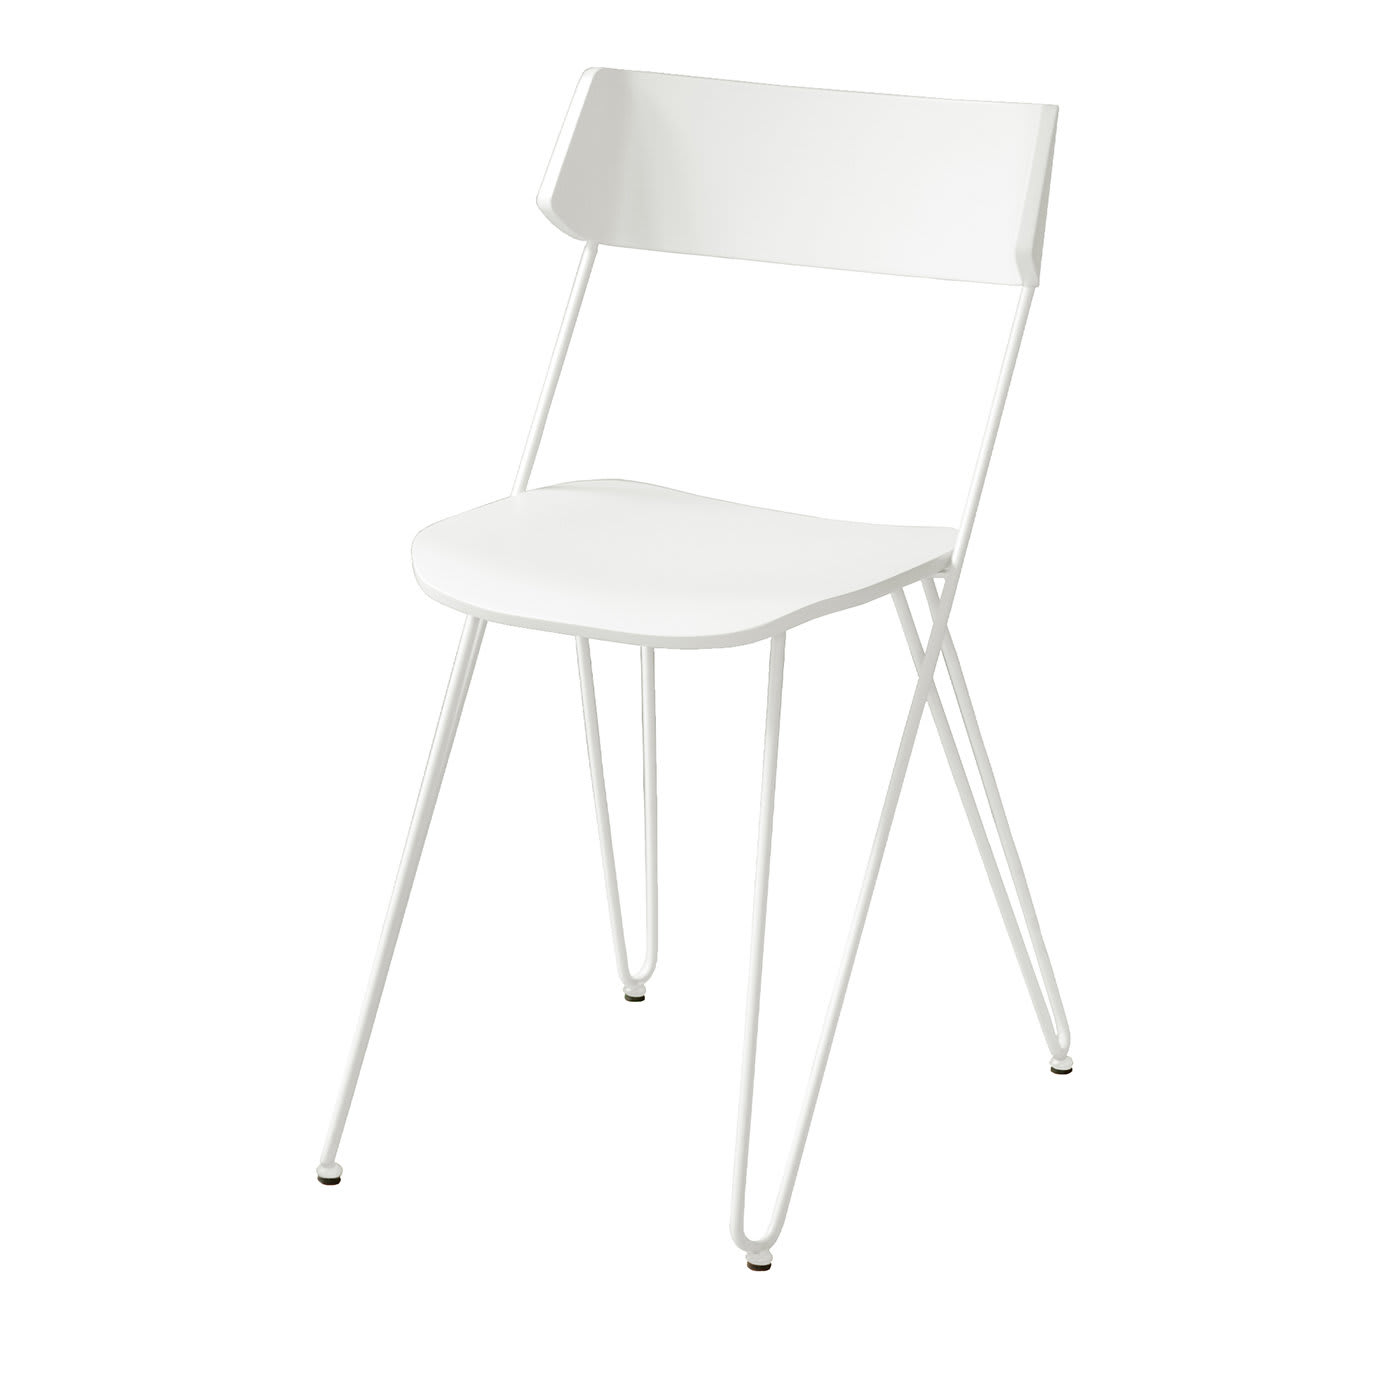 Ibsen White Chair - Greyge